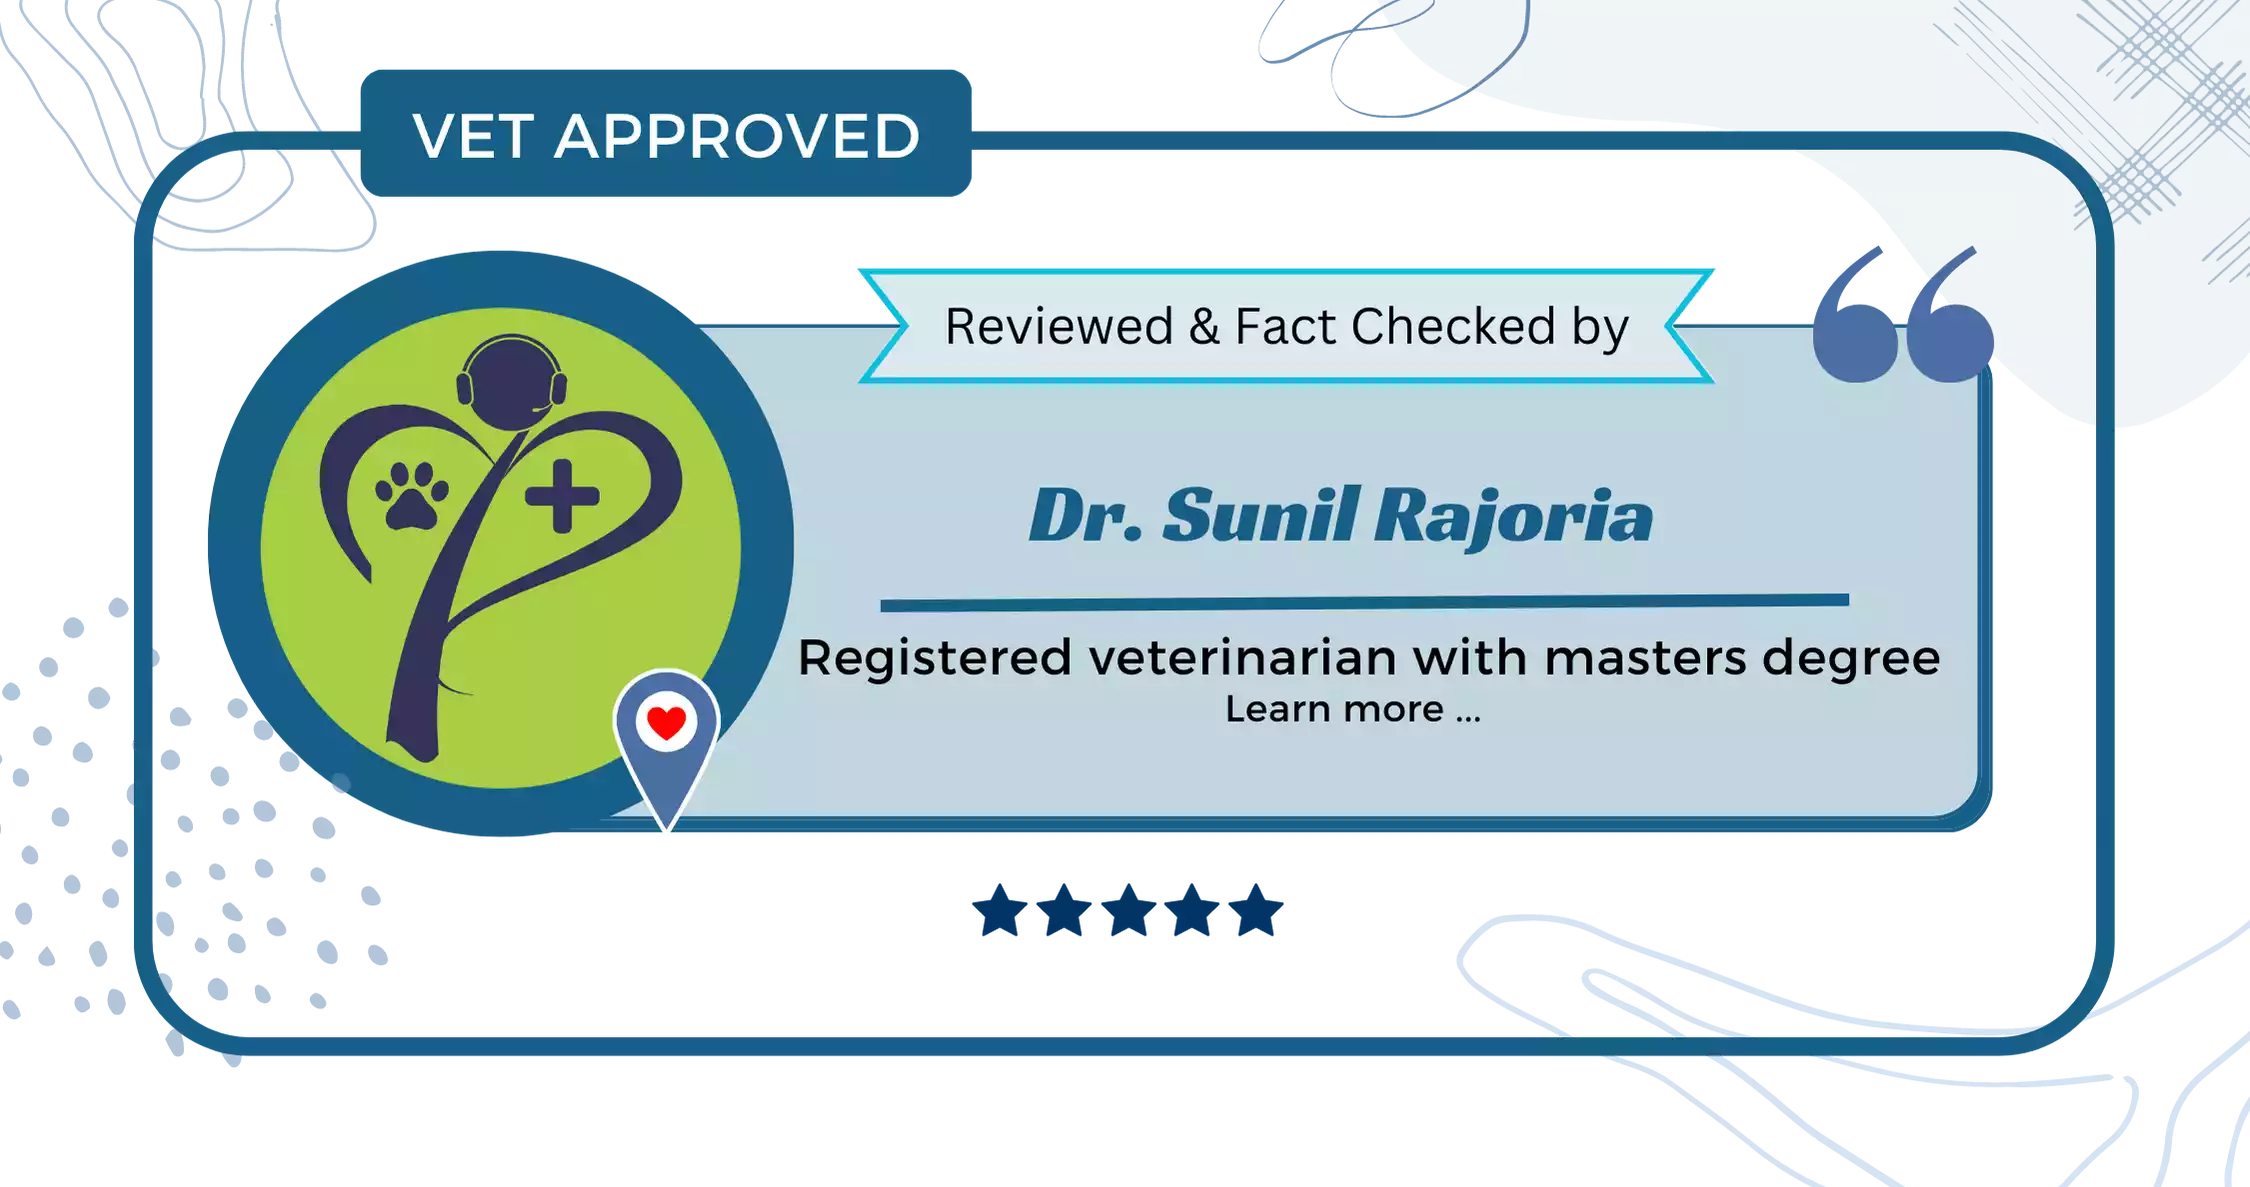 Vet Approved and Fact Checked by Dr. Sunil Rajoria